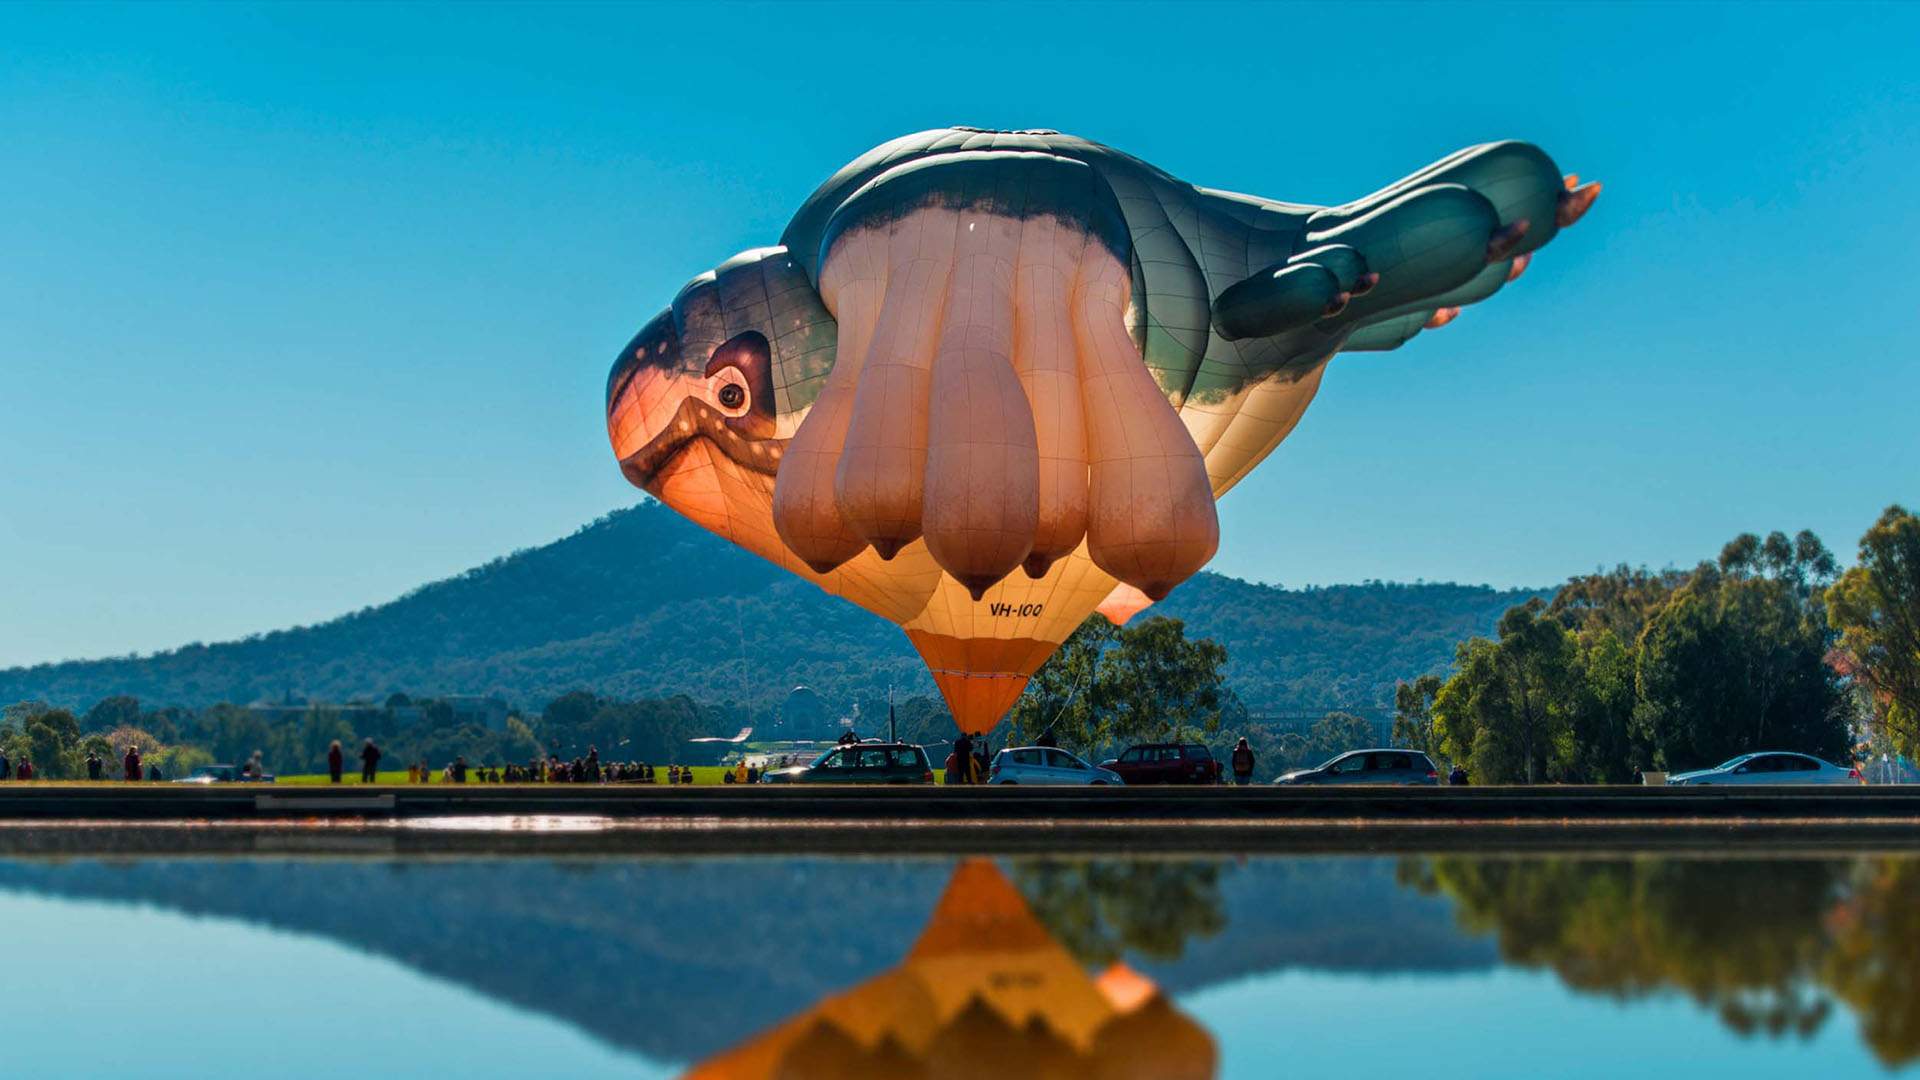 Patricia Piccinini's 'Skywhale' Is Returning to the Skies in 2021 with a New Floating Companion